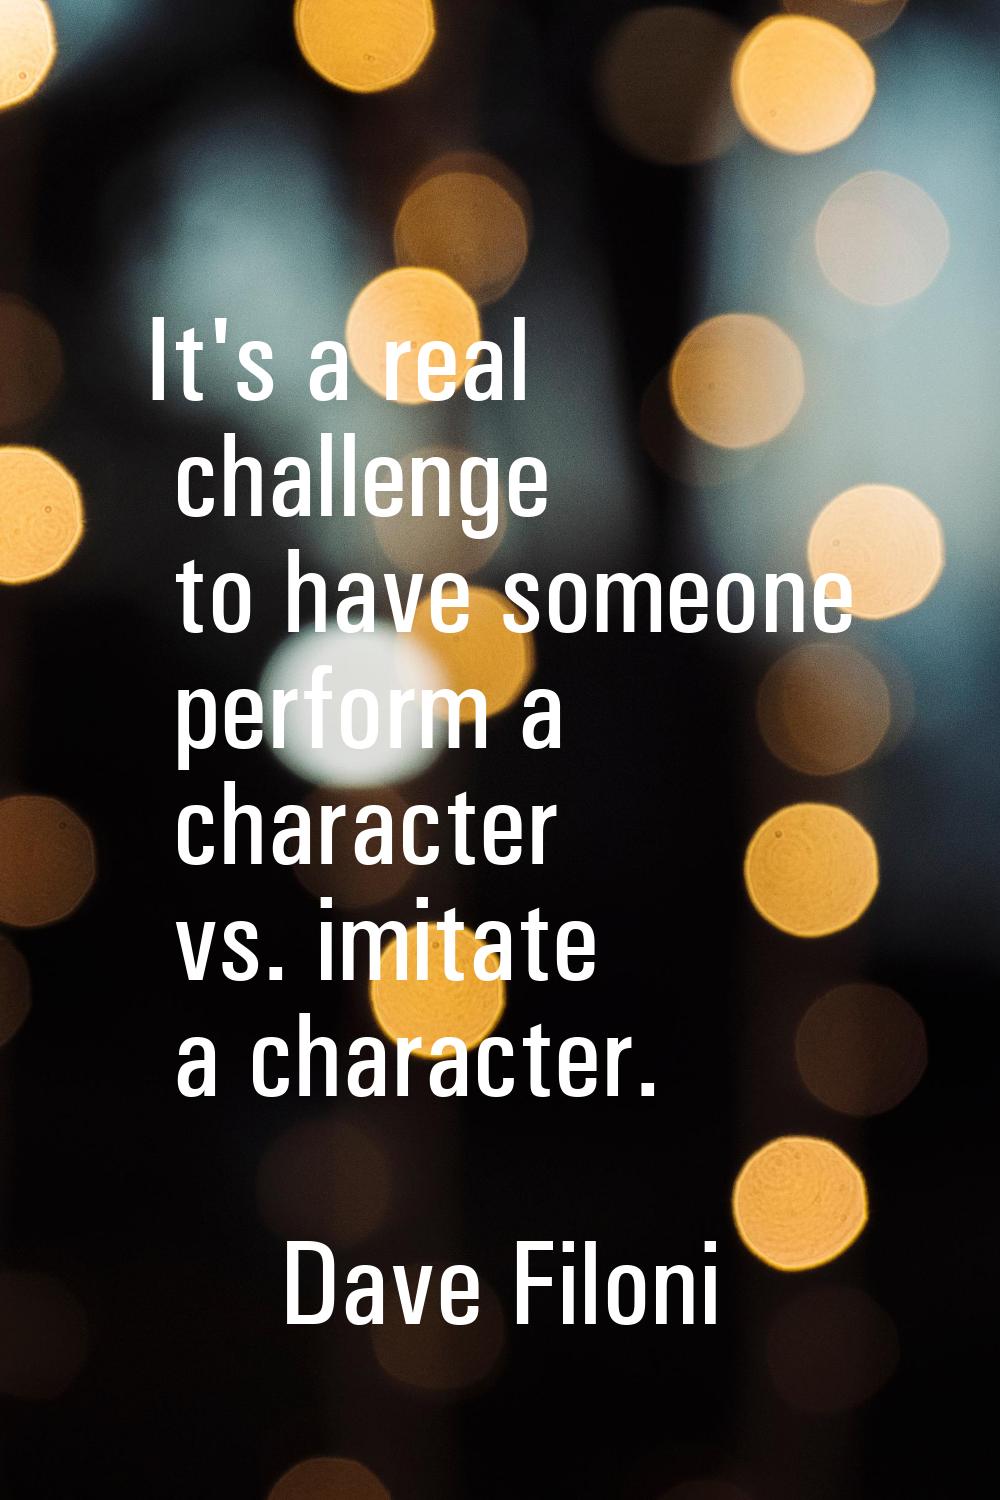 It's a real challenge to have someone perform a character vs. imitate a character.